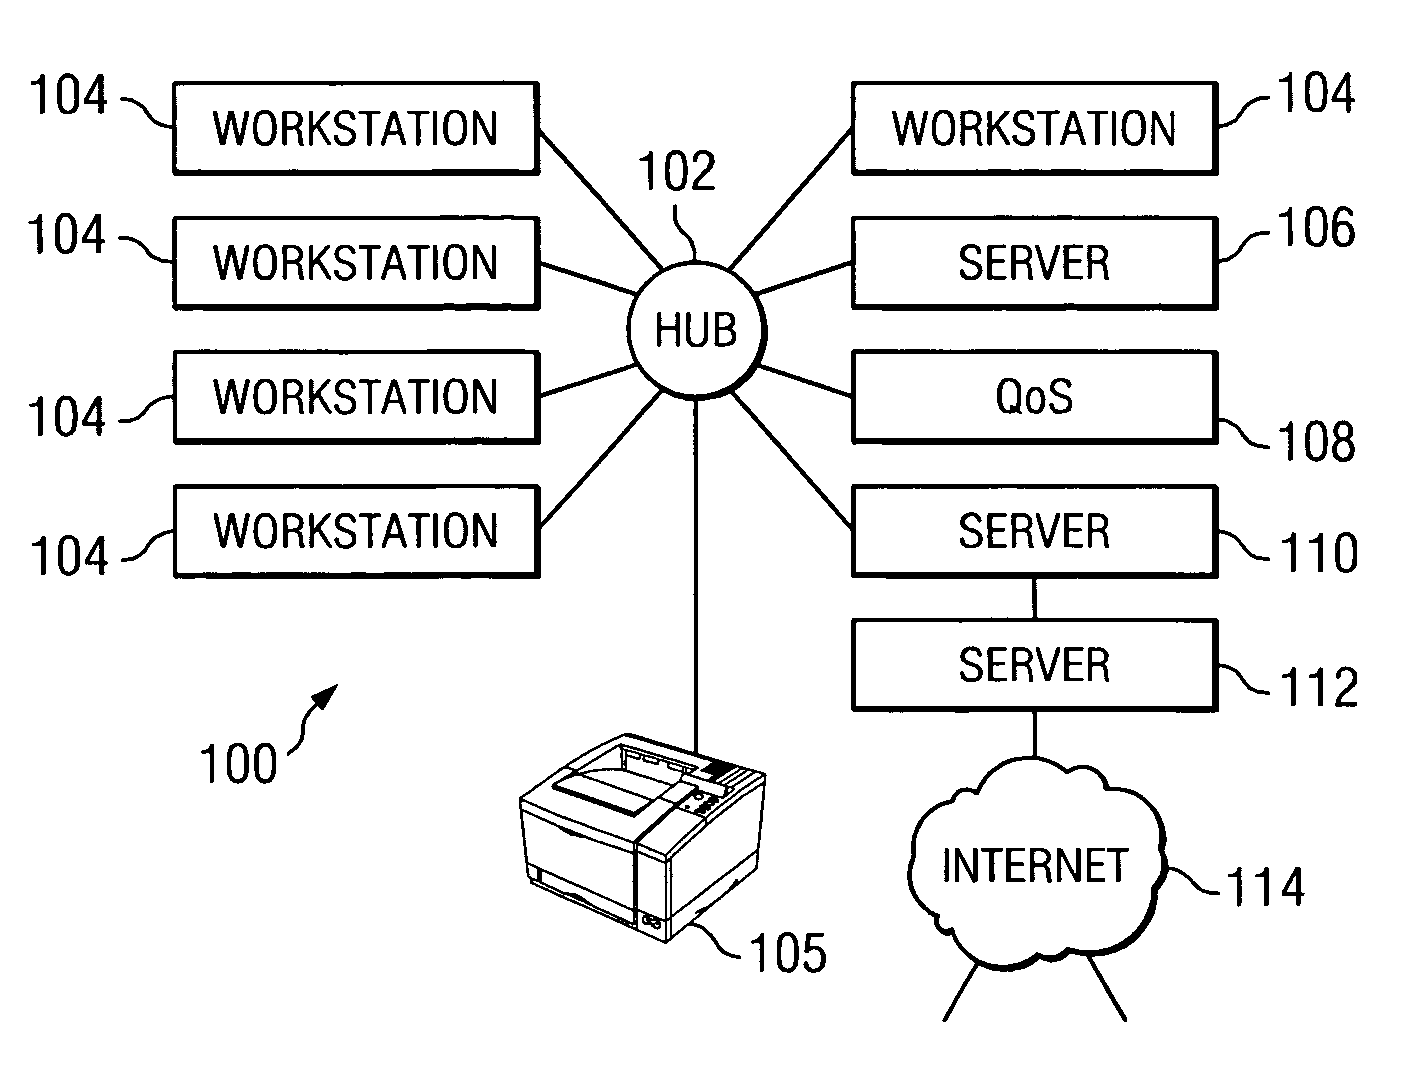 User-centric measurement of quality of service in a computer network